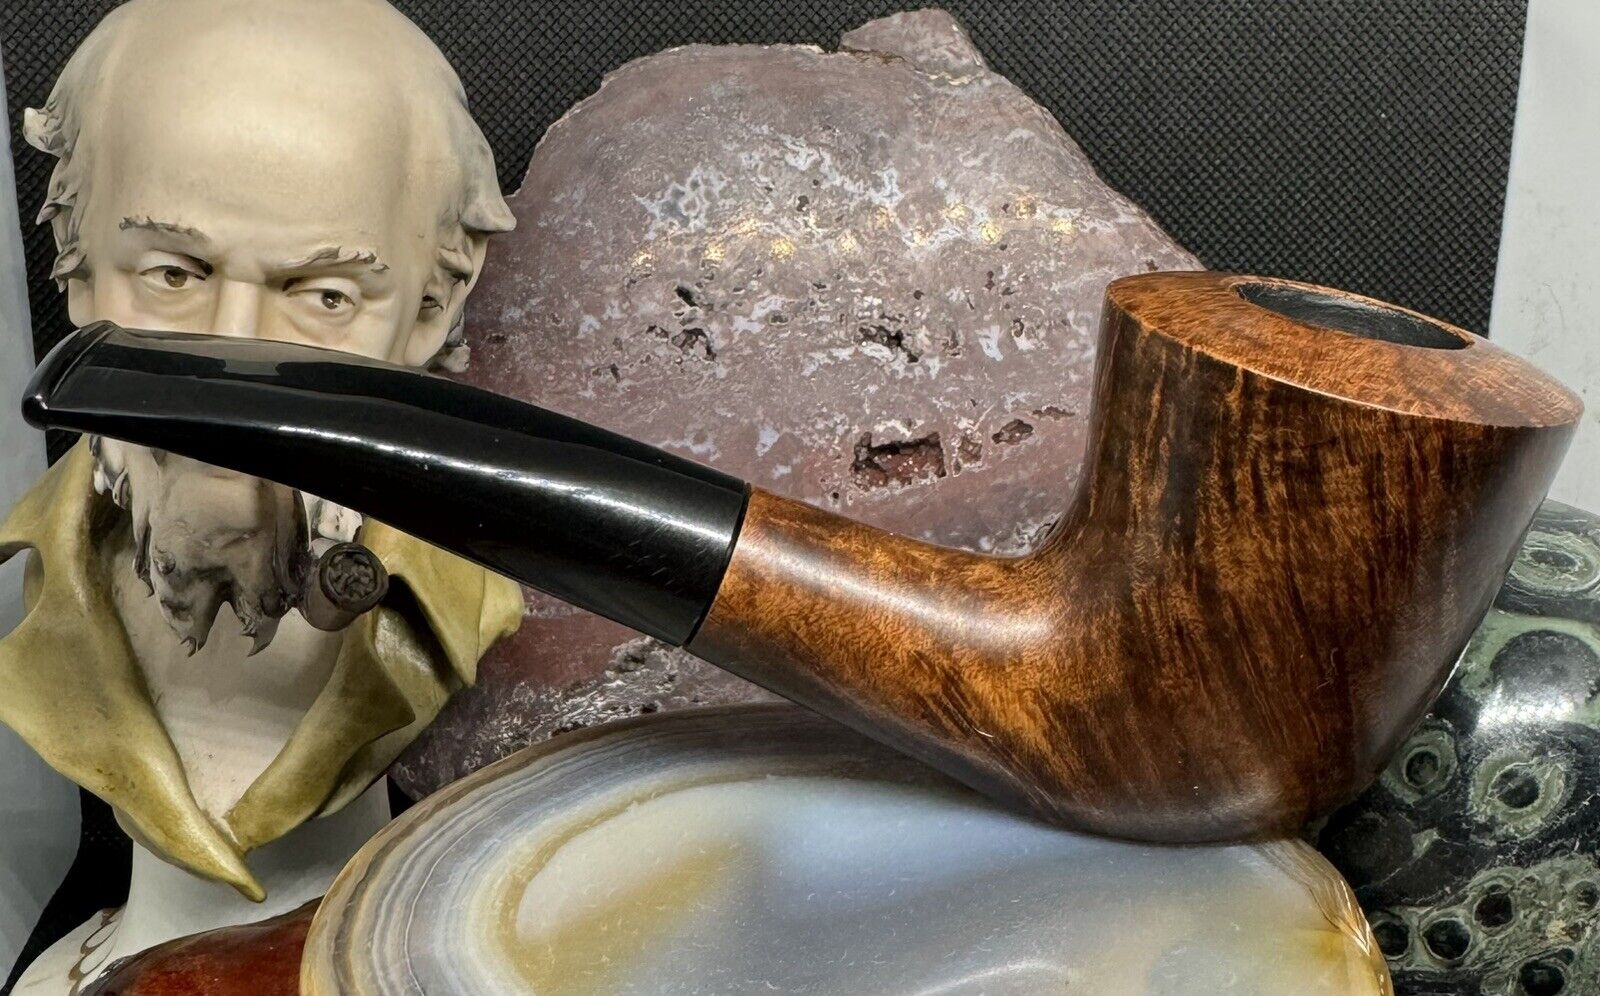 •NEW• Unsmoked DON VITO Sitting Billiard Fine Briar Pipe By Manelli from Italy